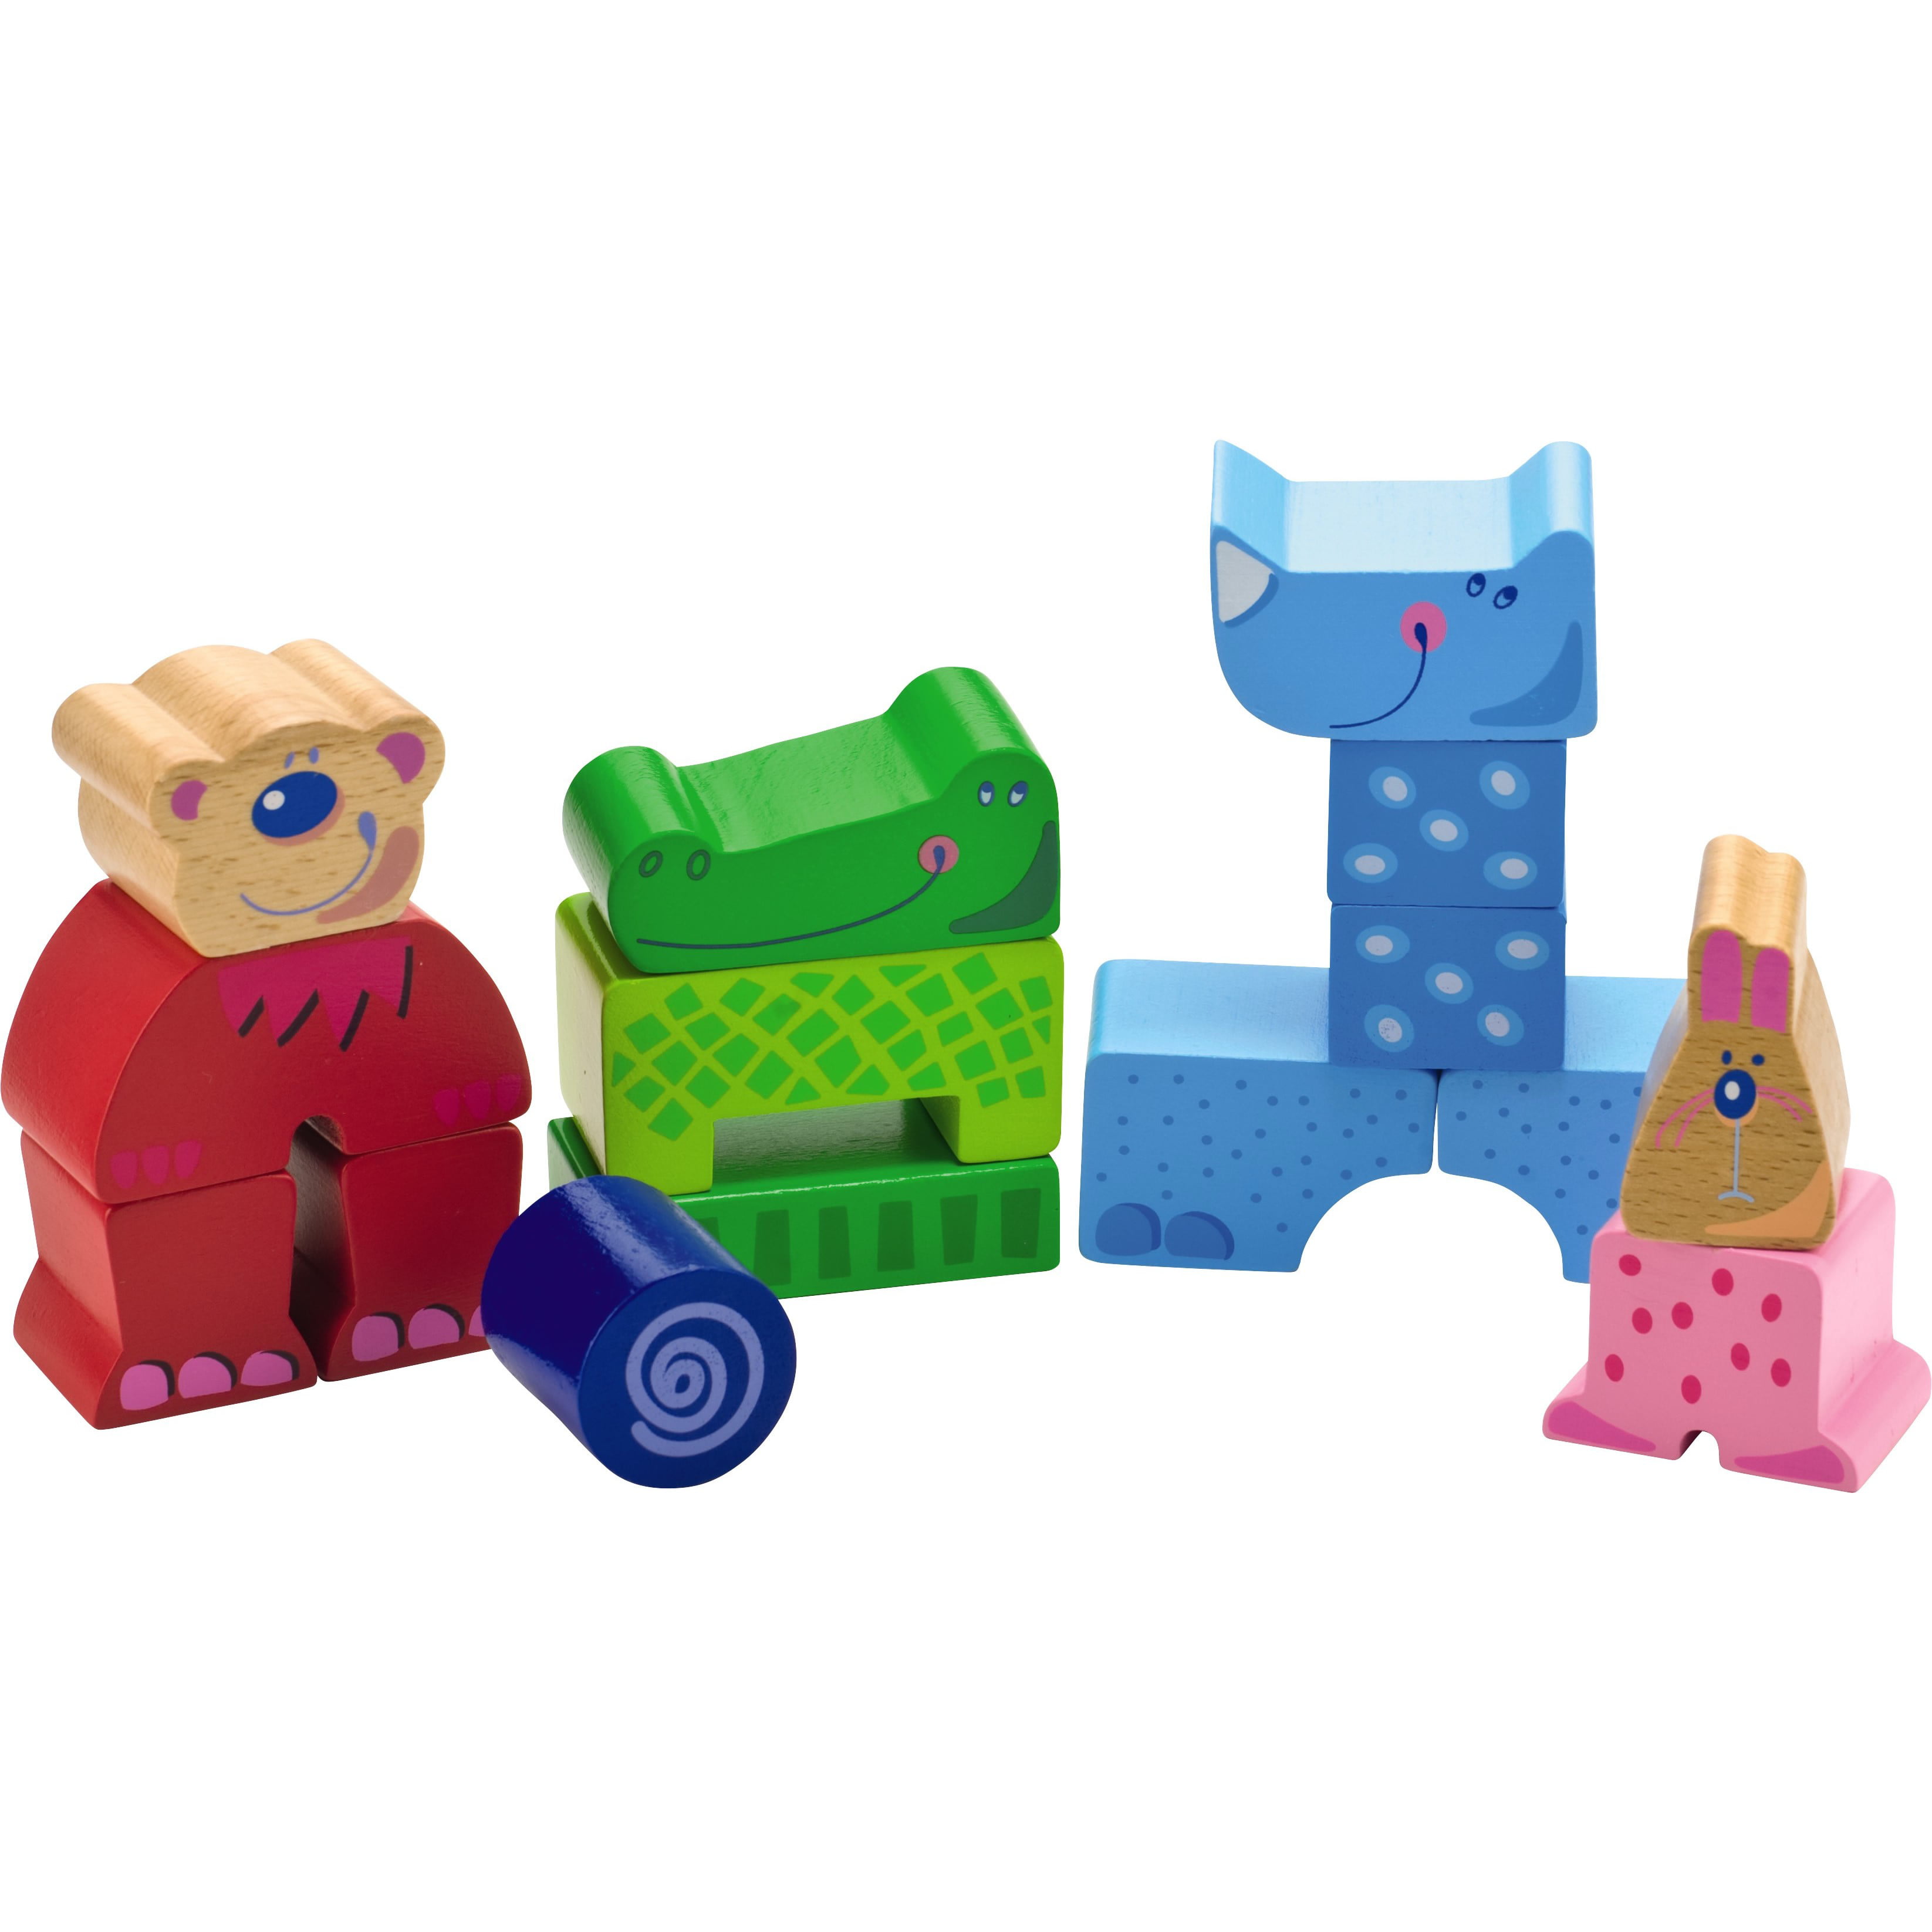 HABA Zippity Zoo Colorful Wooden Animal Blocks for sale online 